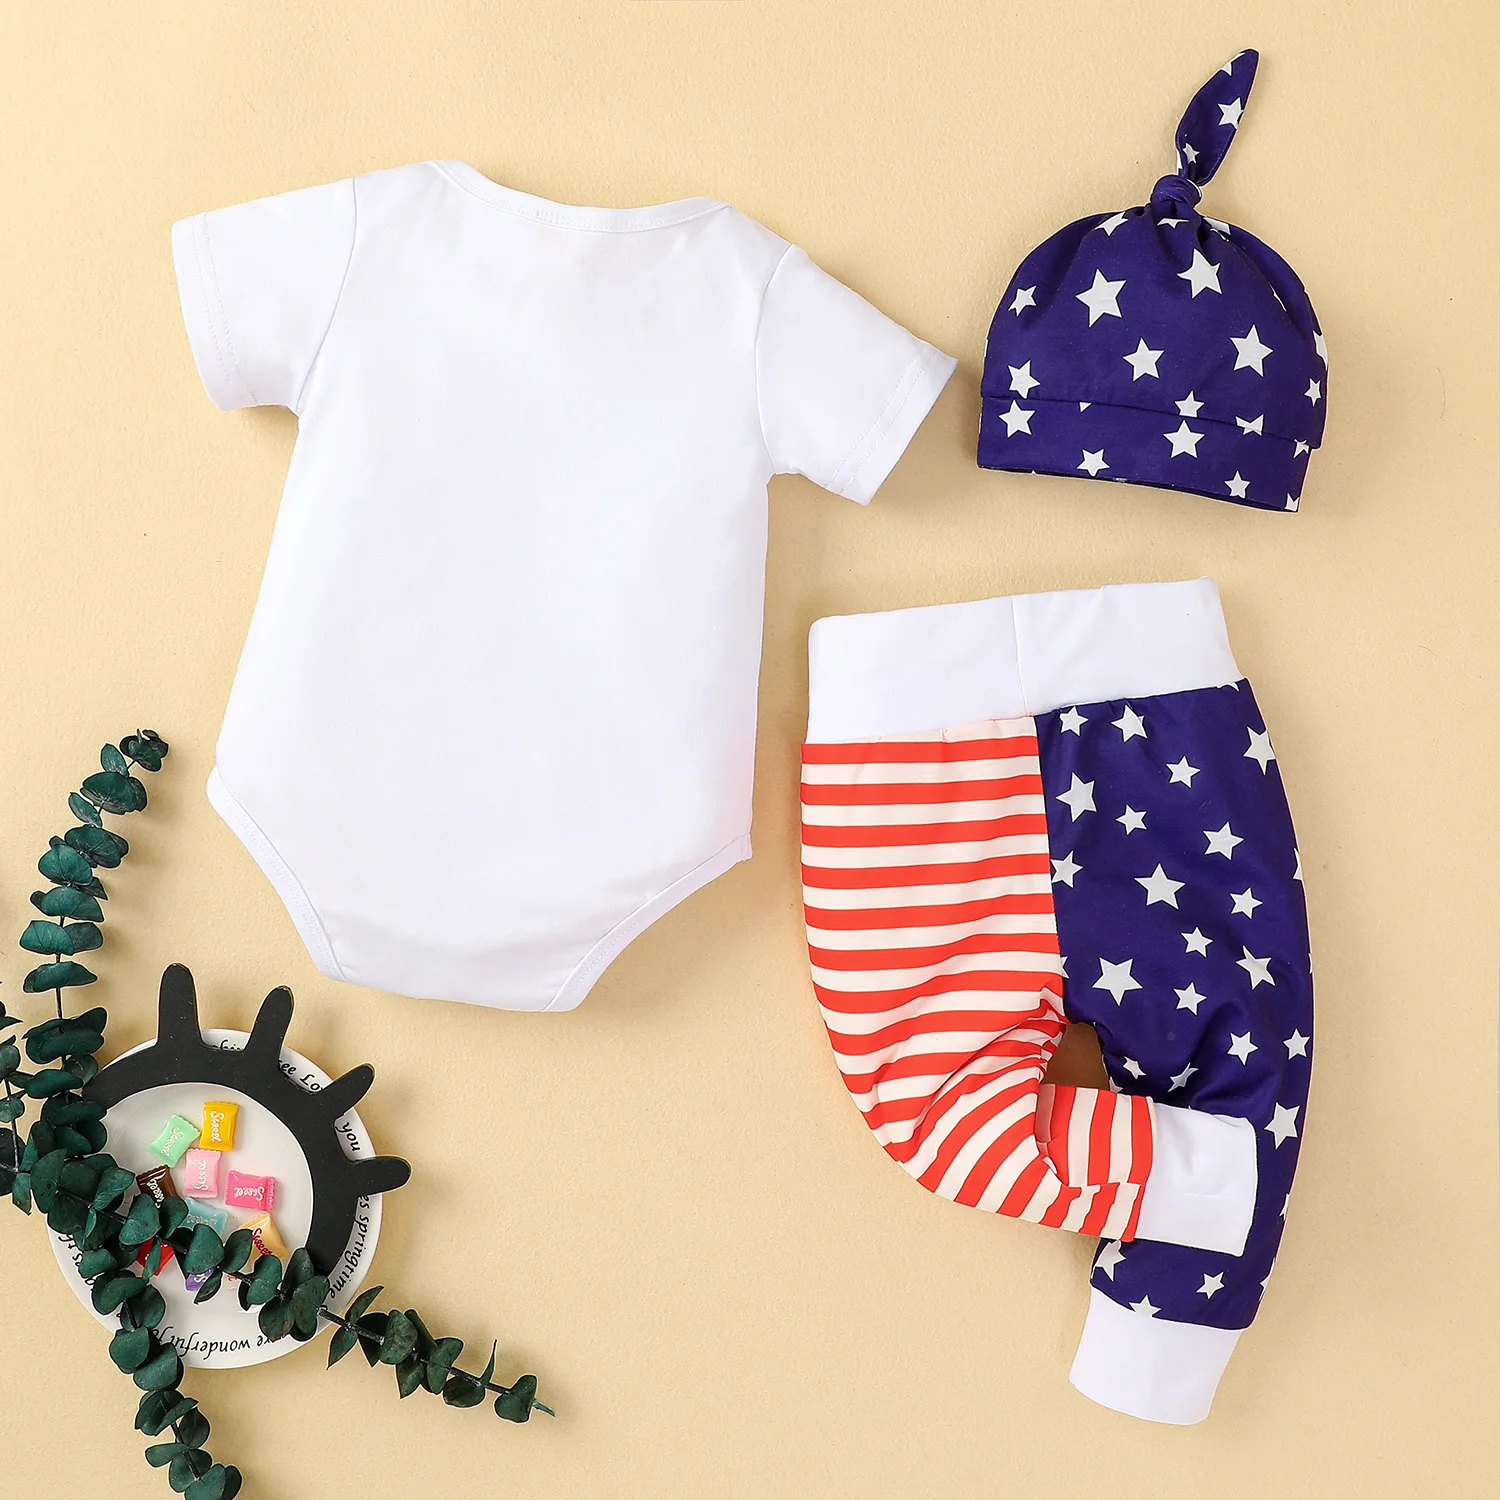 

2021-04-02 Lioraitiin 3Pcs Set 0-18M Newborn Infant Baby Boy Independence Day Clothing Printed Romper Top Pant Hat Outfit